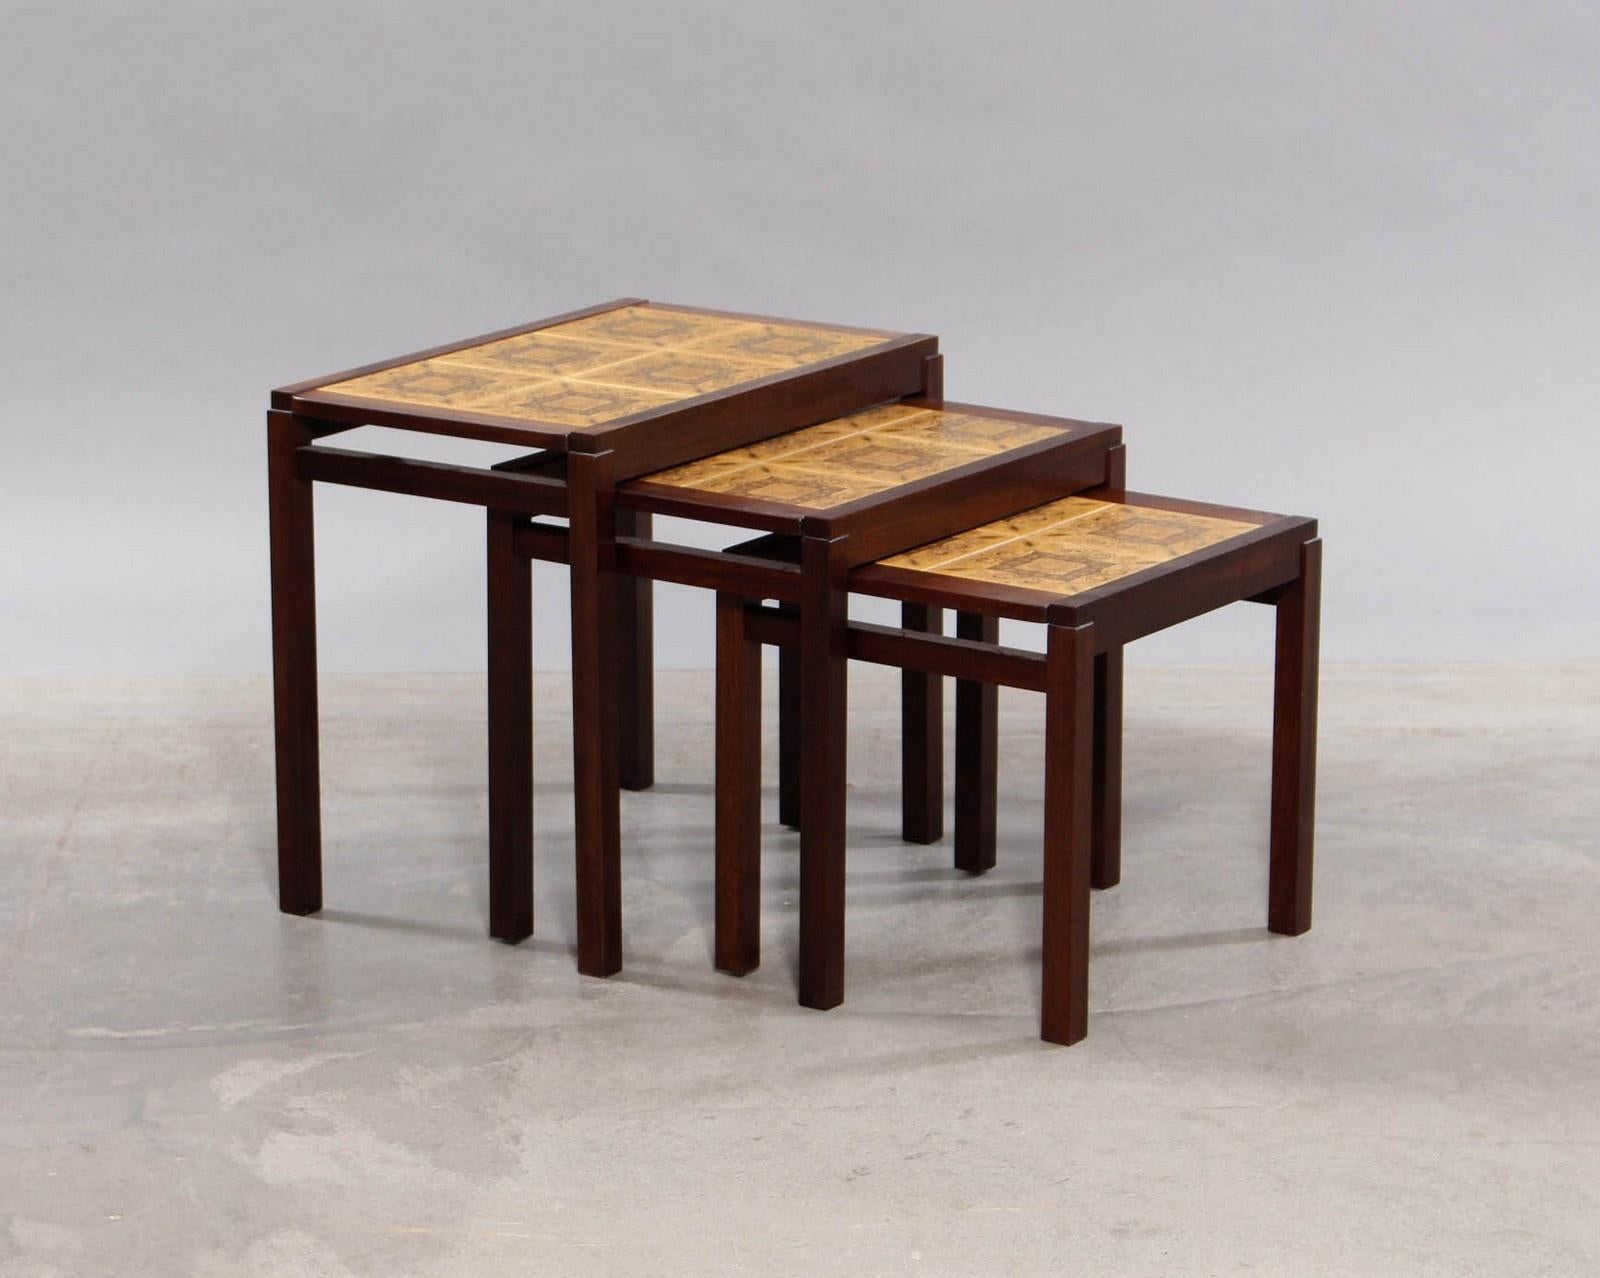 Set of Three Rosewood and Ceramic Tile Danish Modern Nesting Tables For Sale